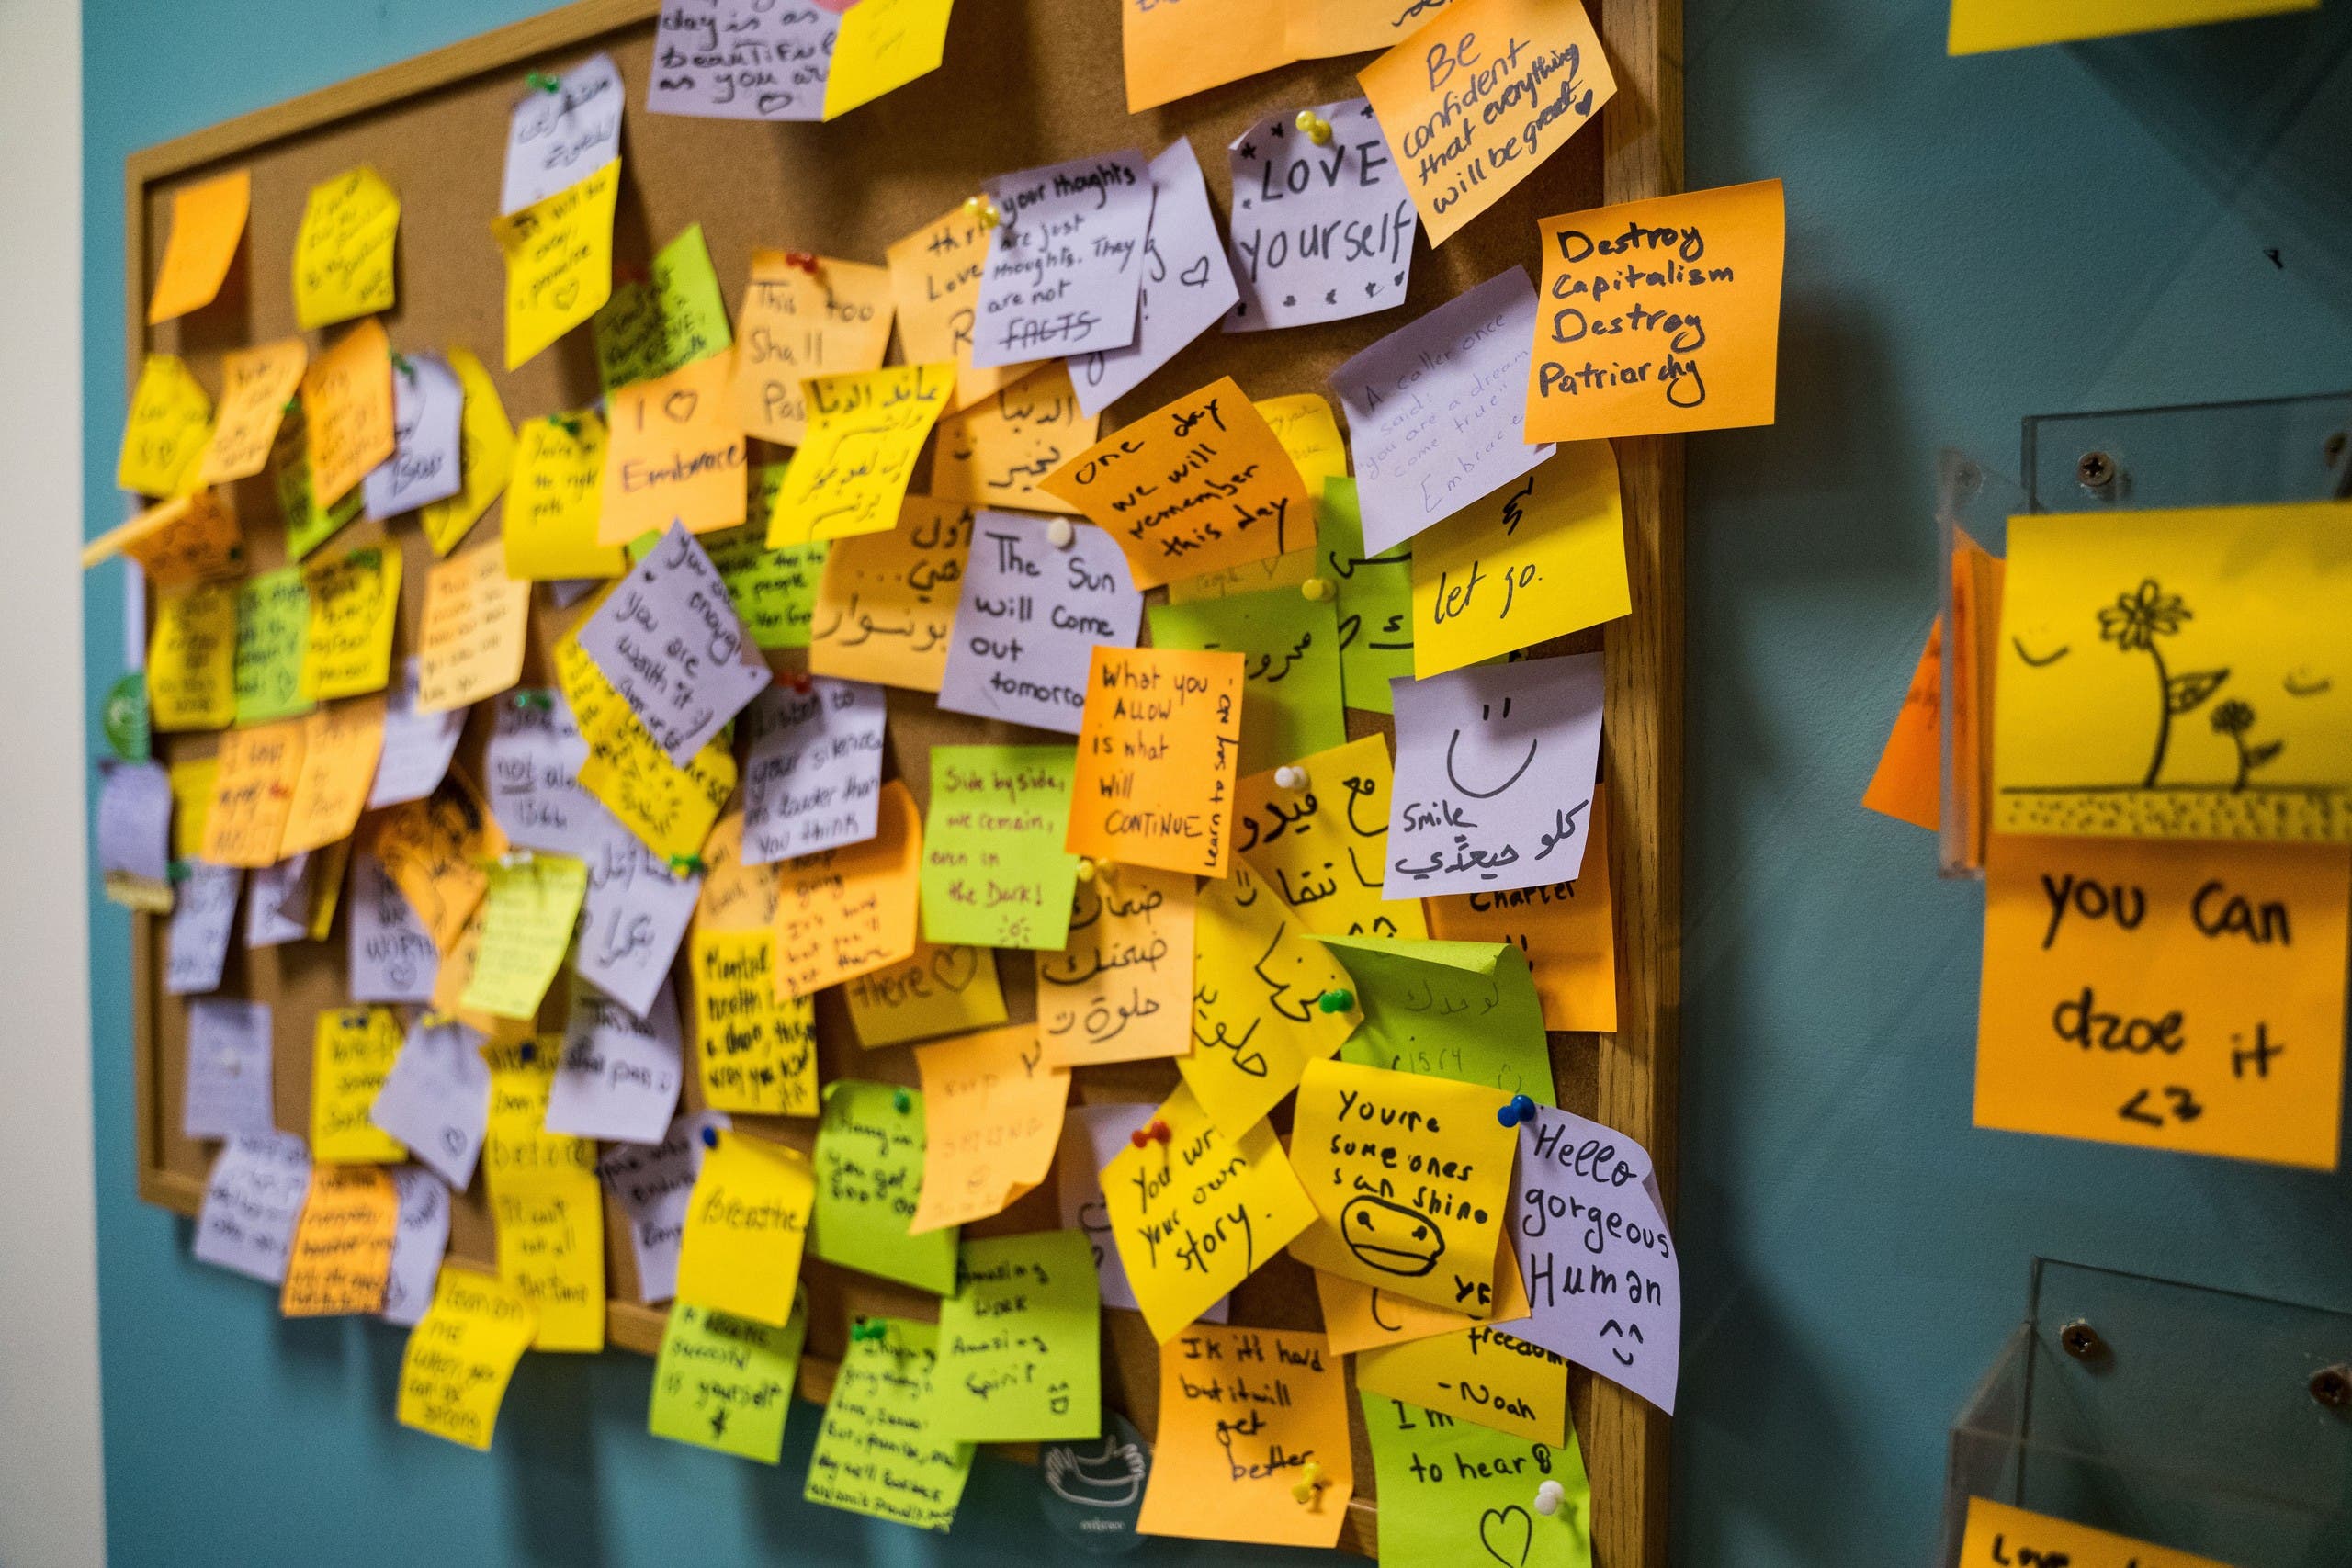 Post-it note board at Embrace Community Mental Health Center where patients and caregivers can leave words of encouragement.  (Photo: Clement Gibon)